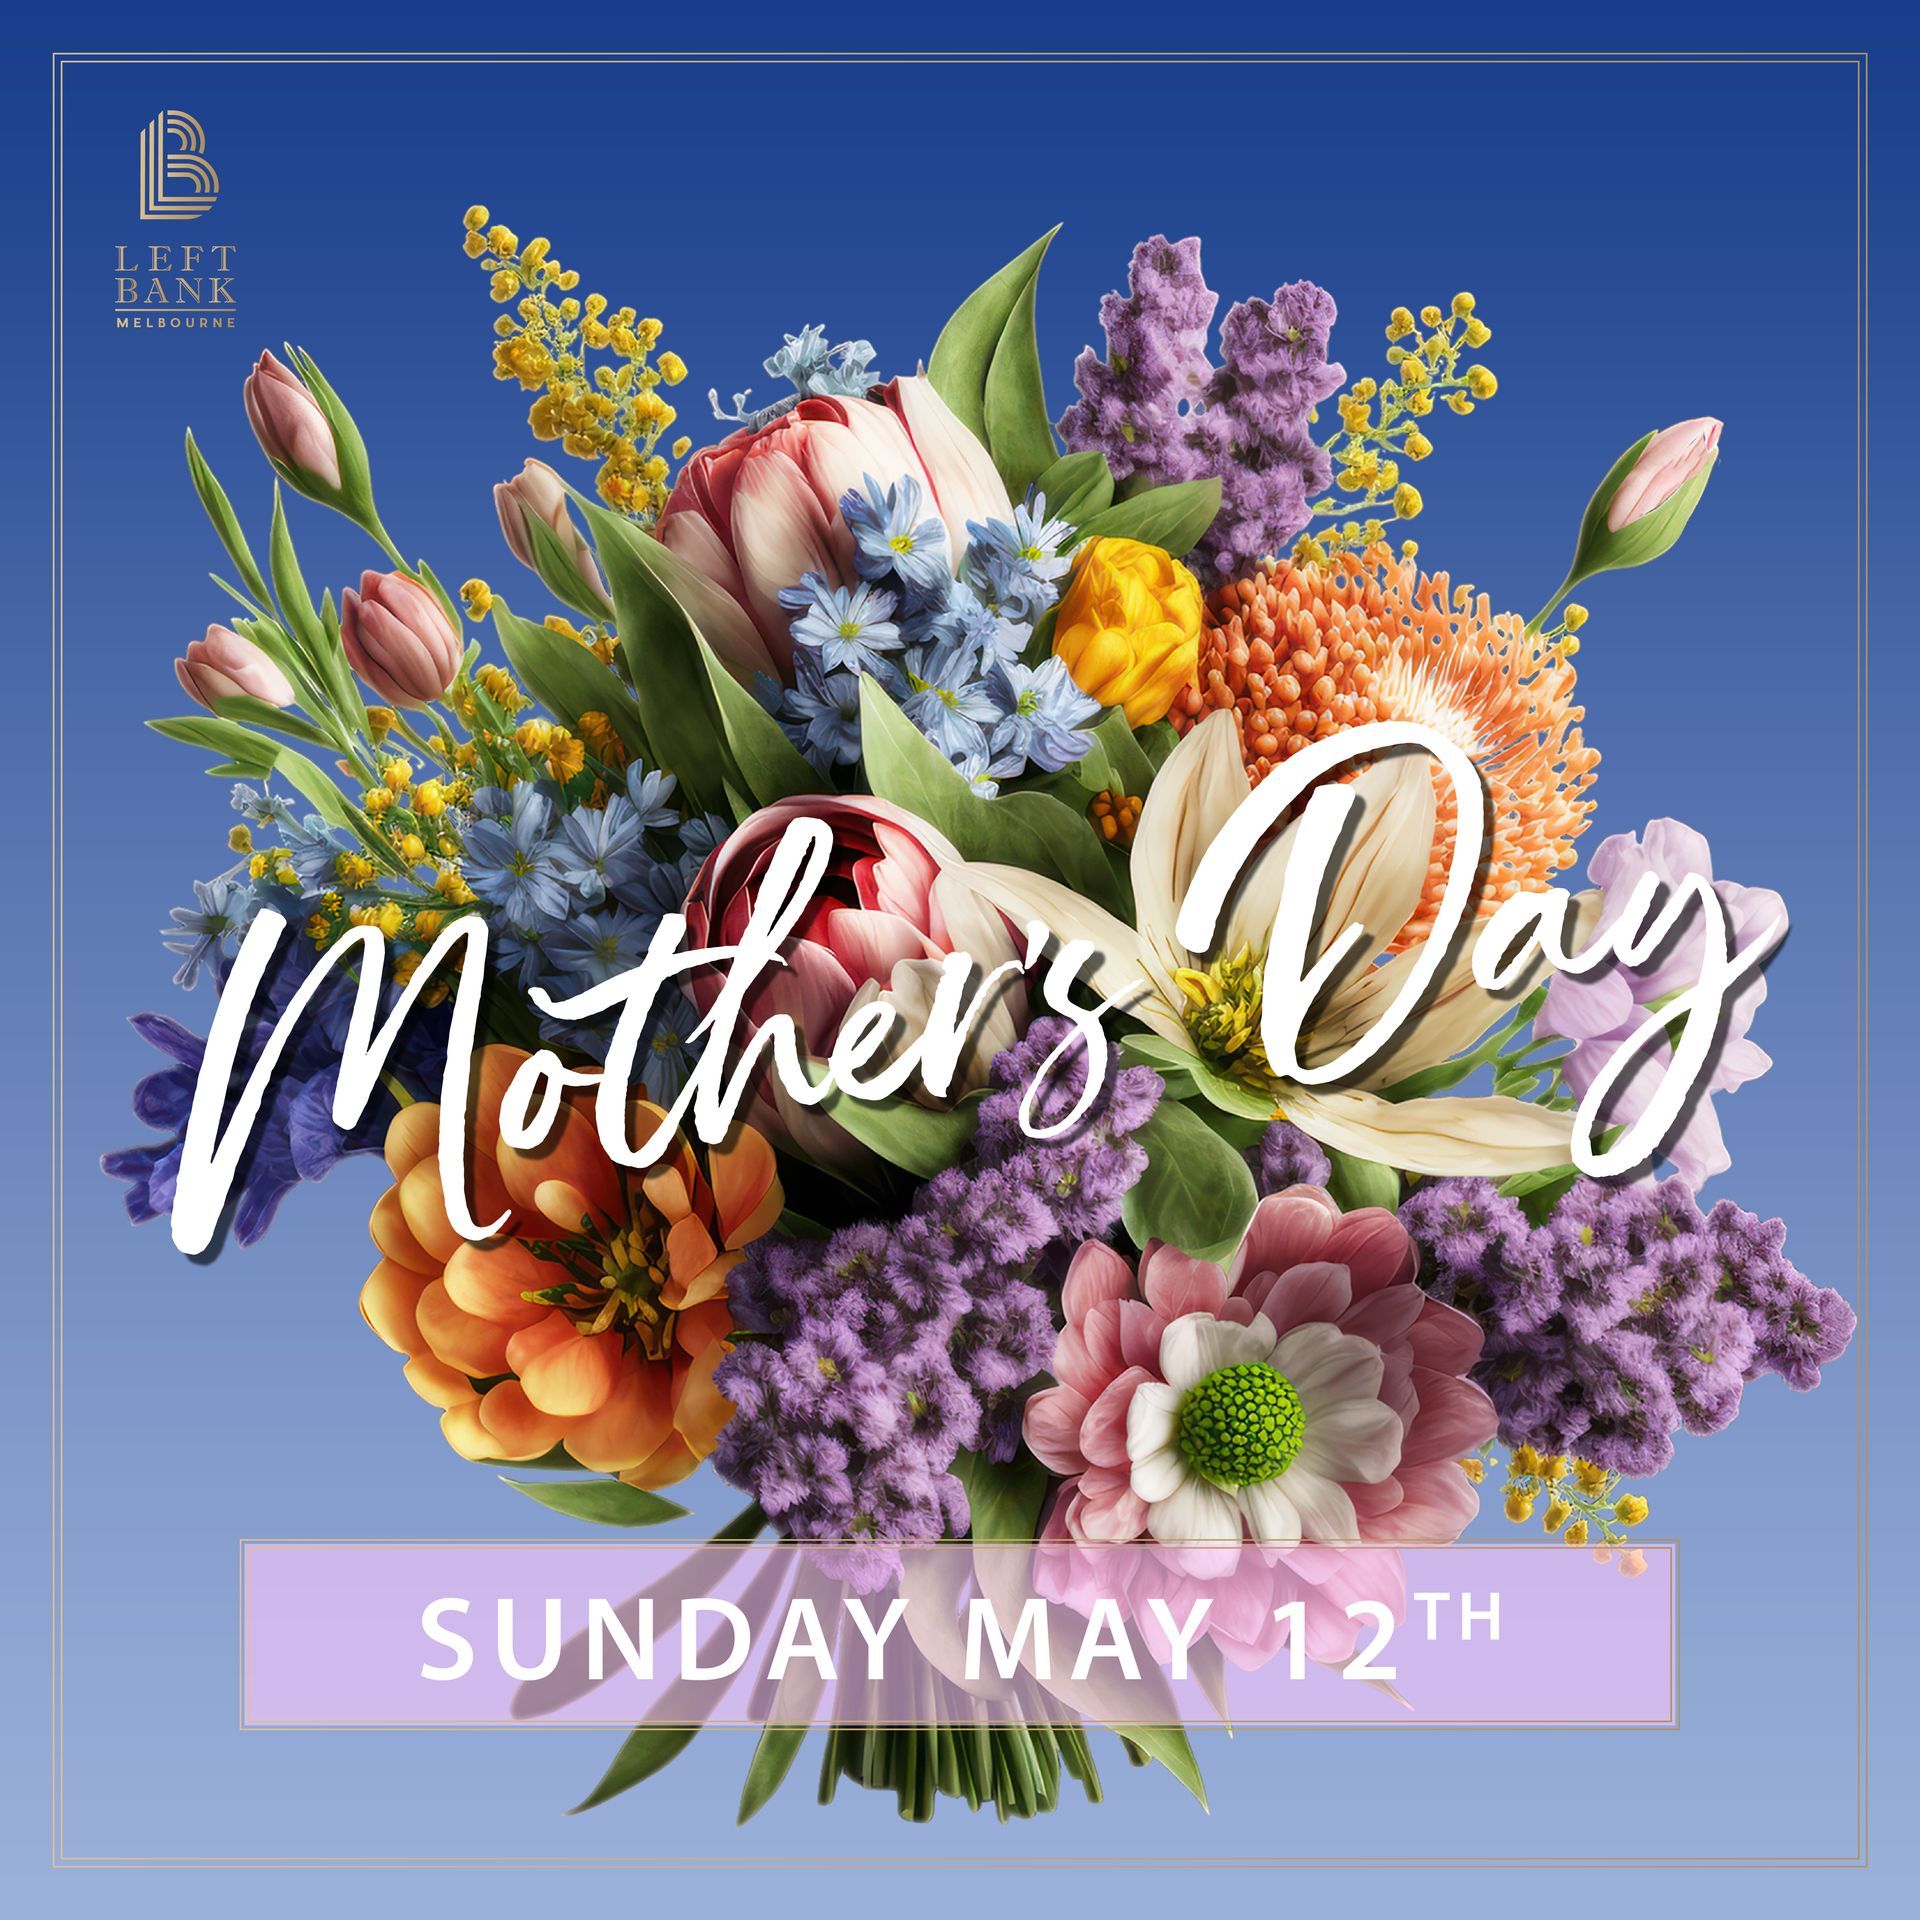 Celebrate Mother's Day in style at Left Bank Melbourne with our exclusive 